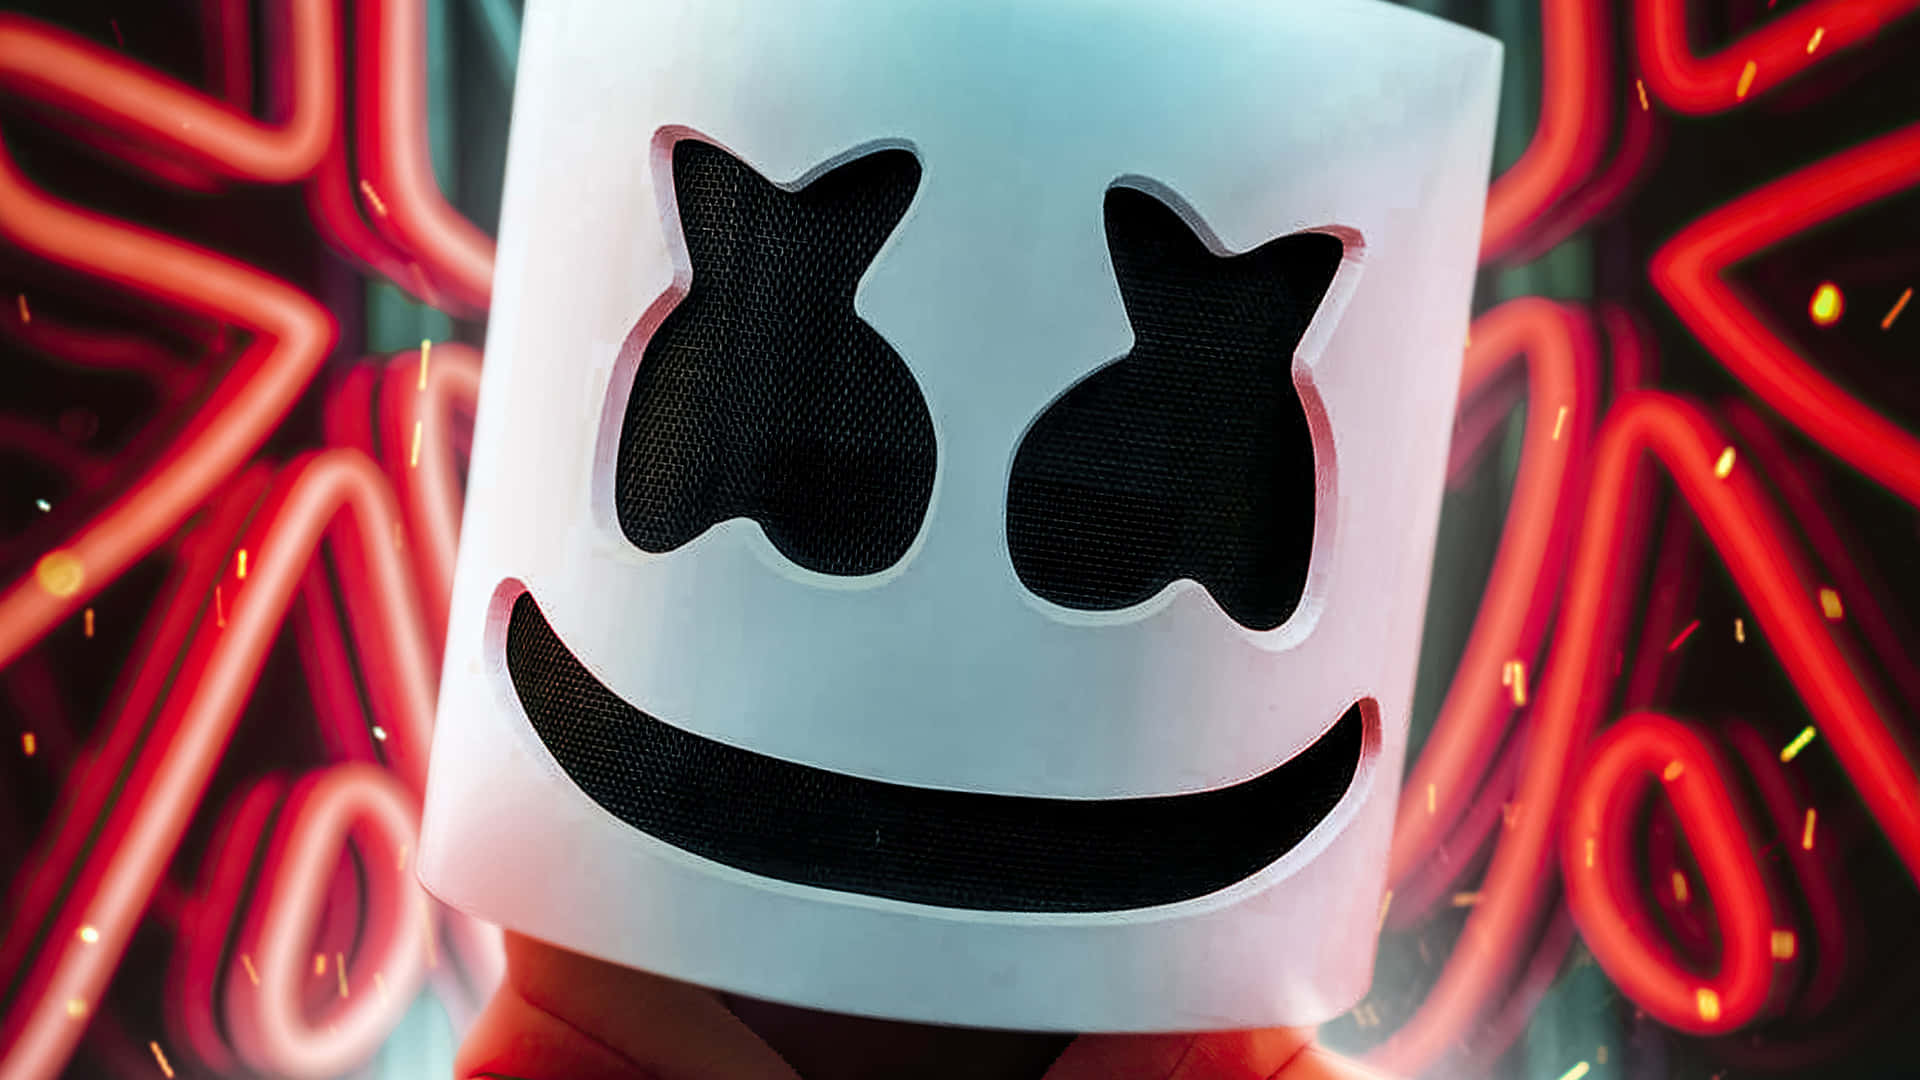 Marshmello is ready to rock the stage